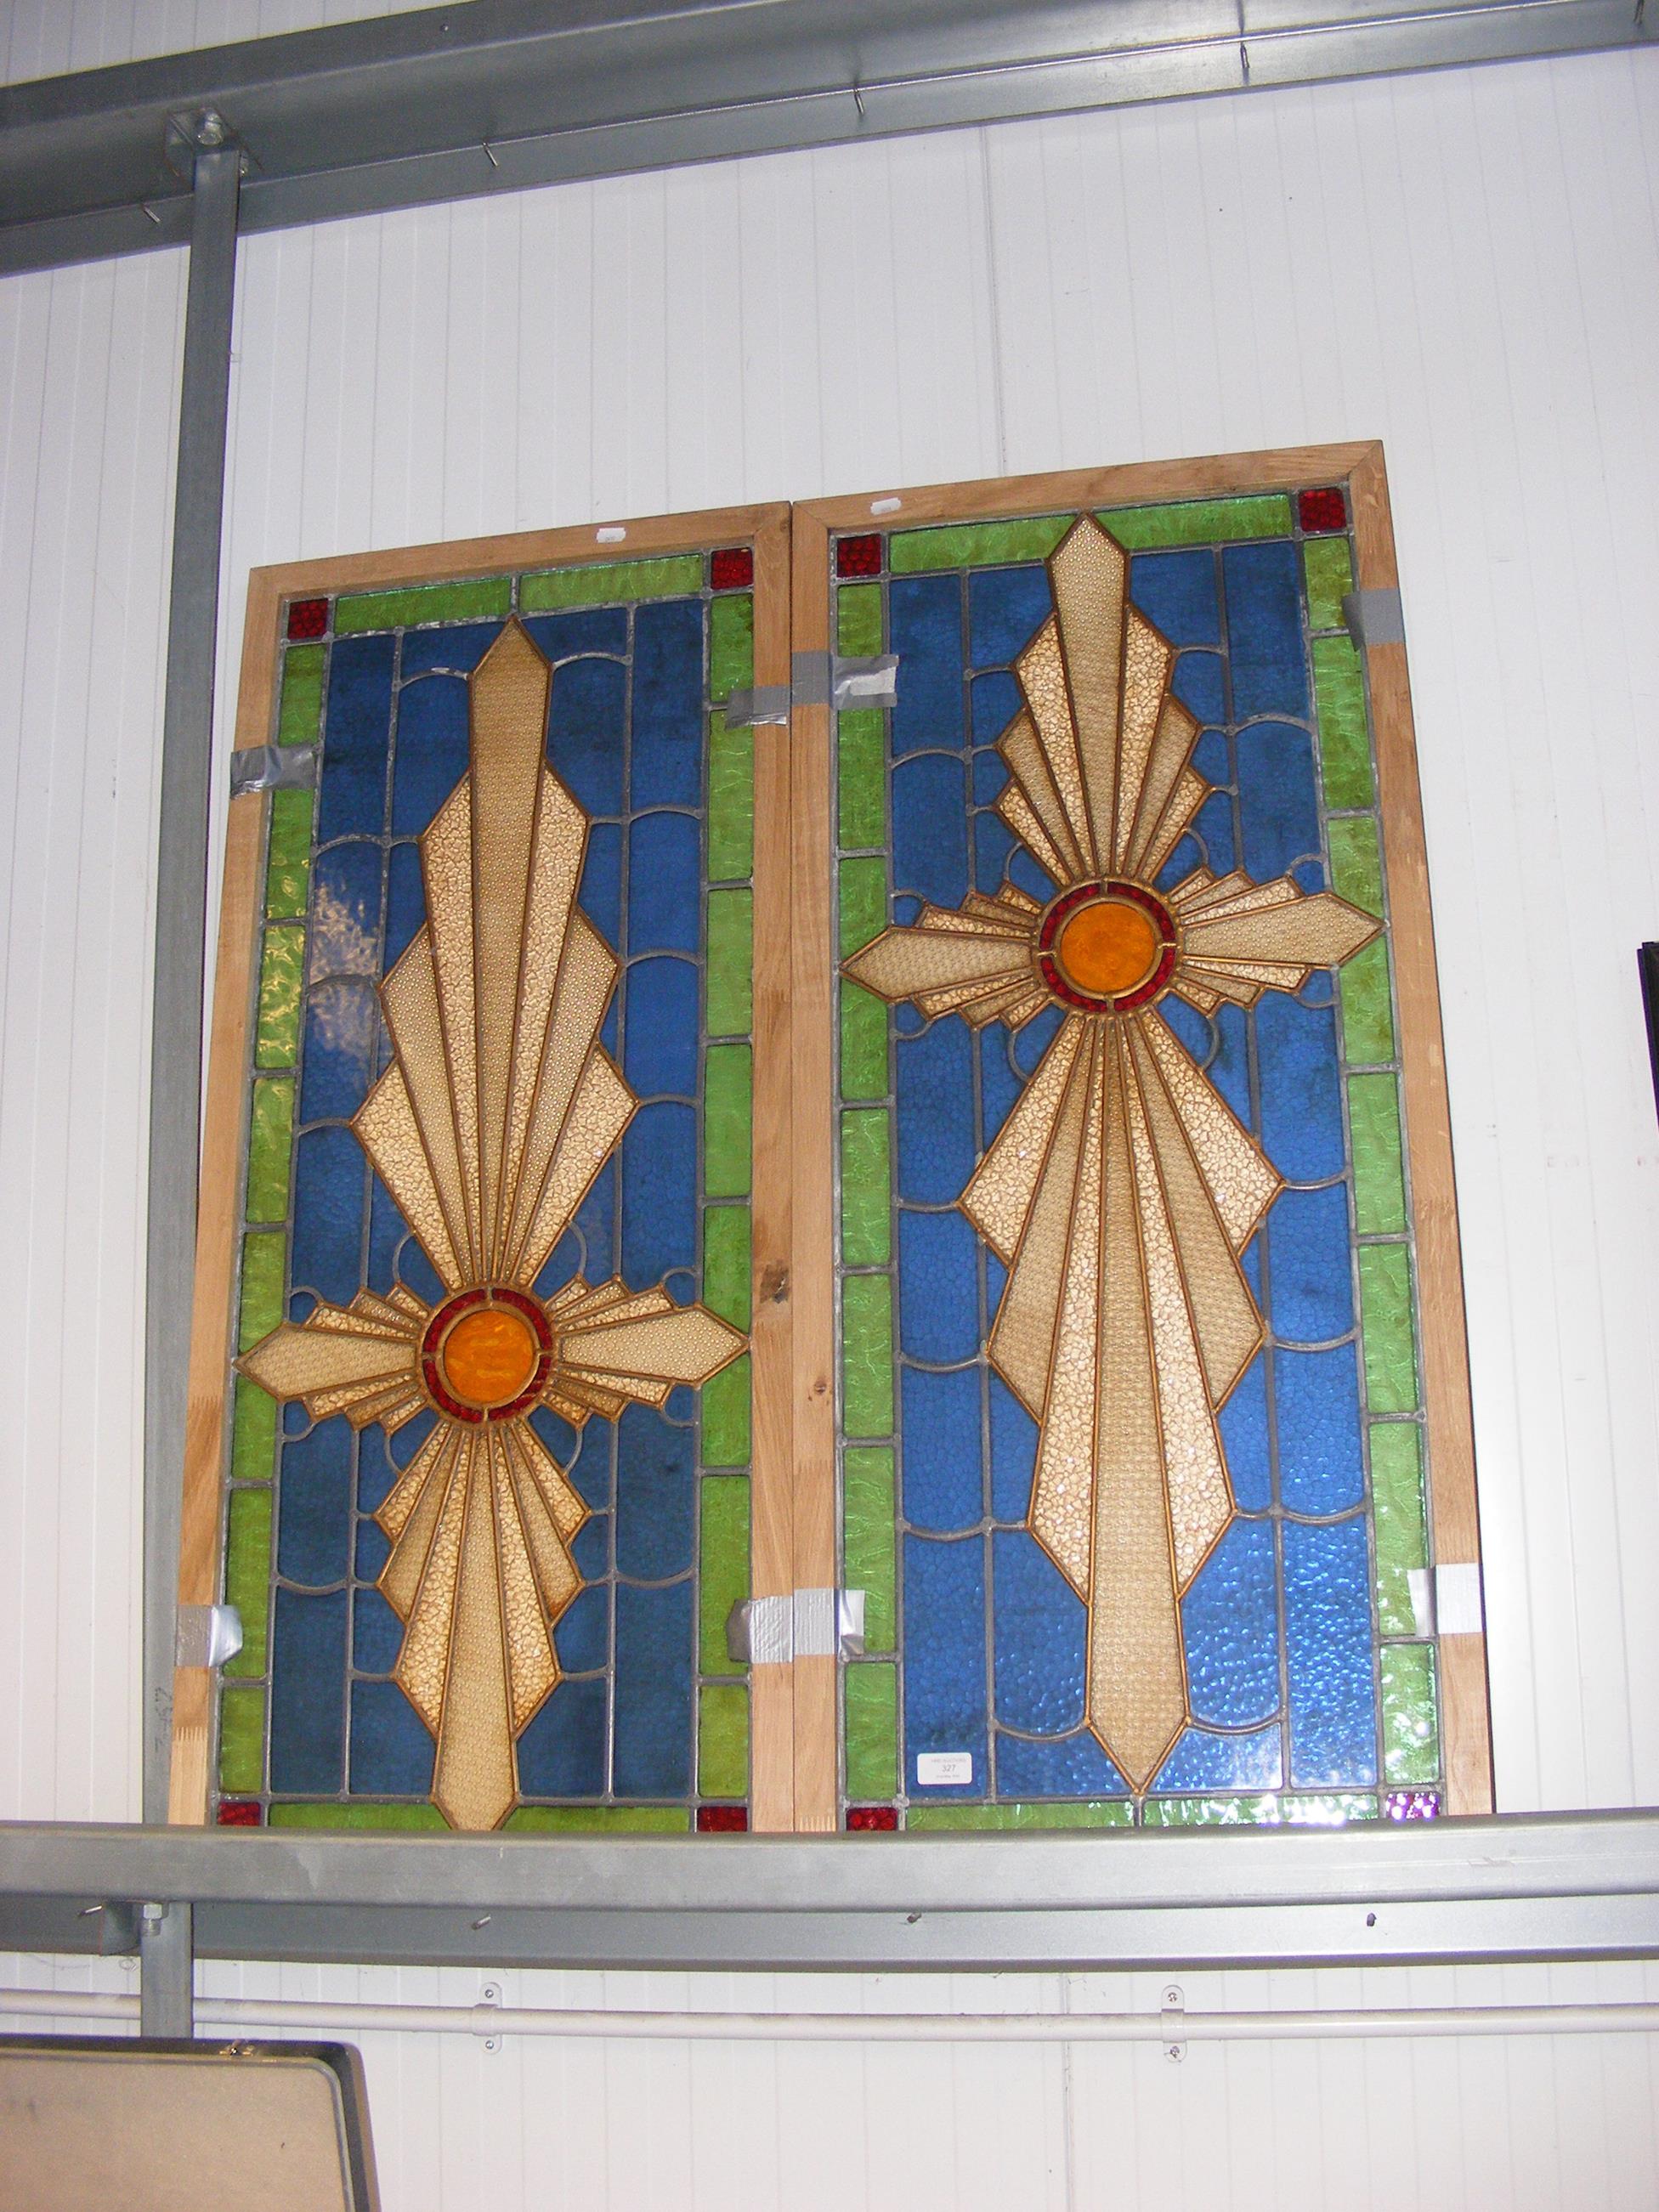 A pair of stained glass windows